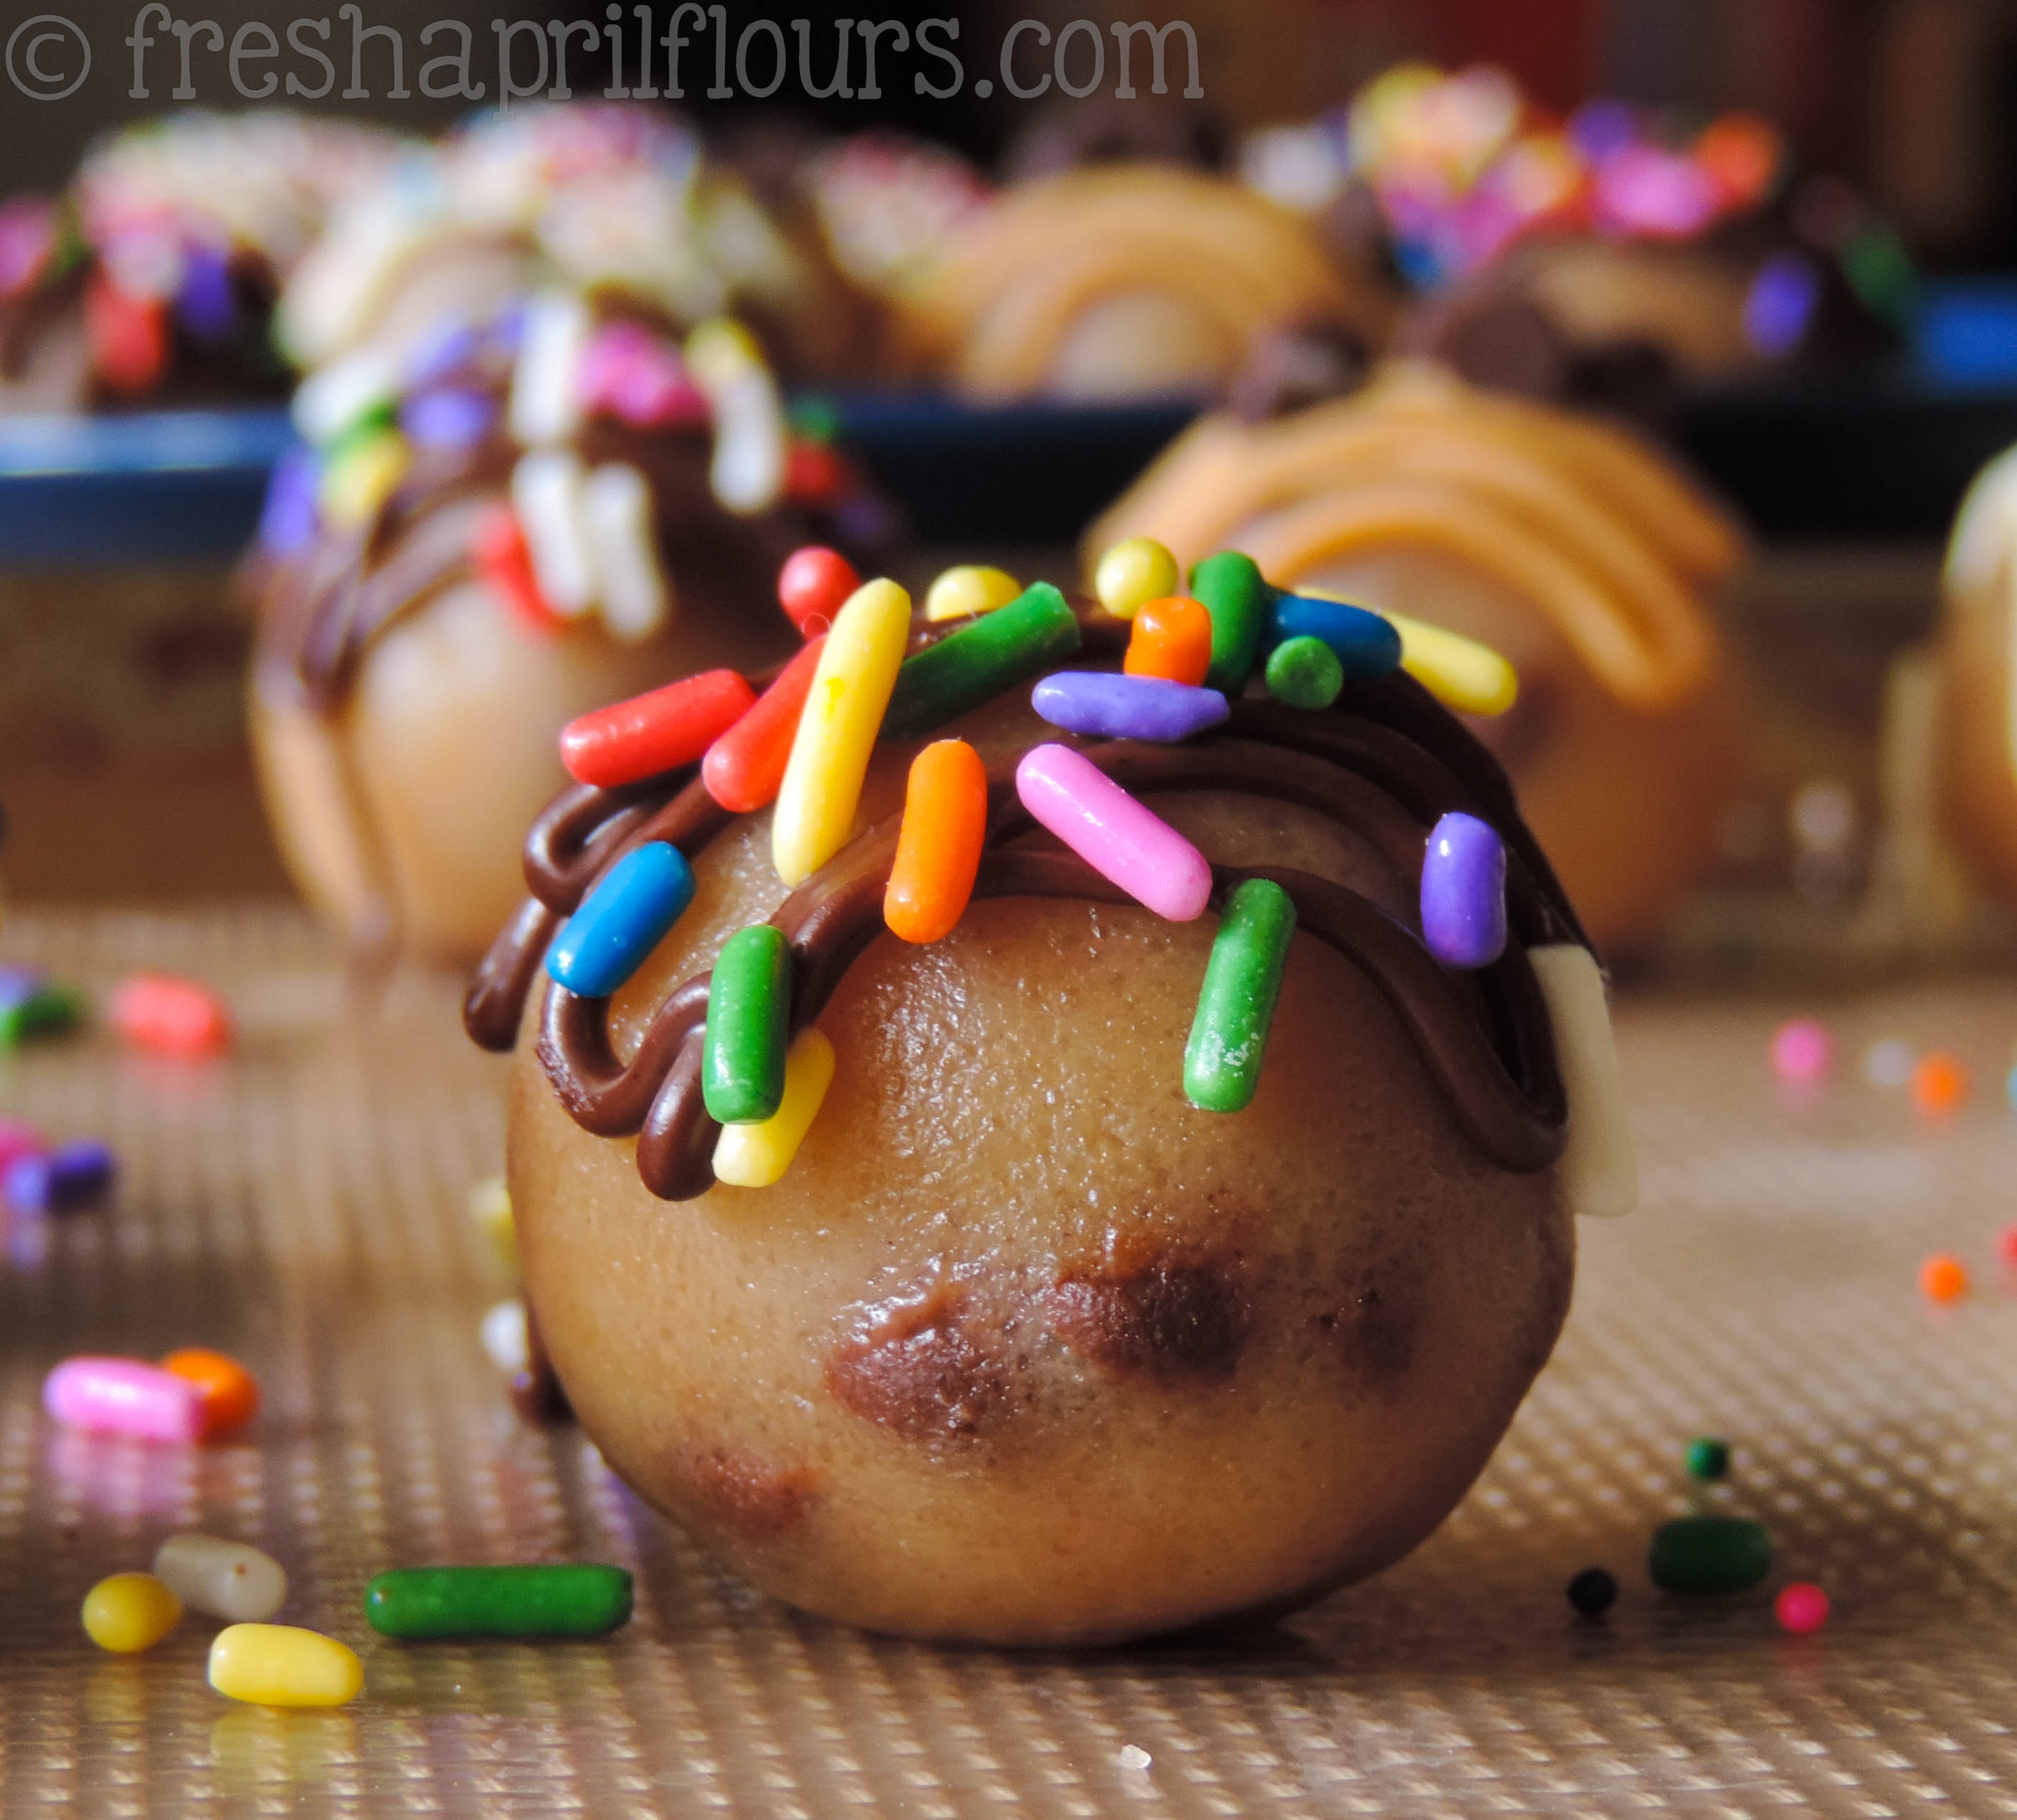 cookie dough bite with chocolate drizzle and sprinkles